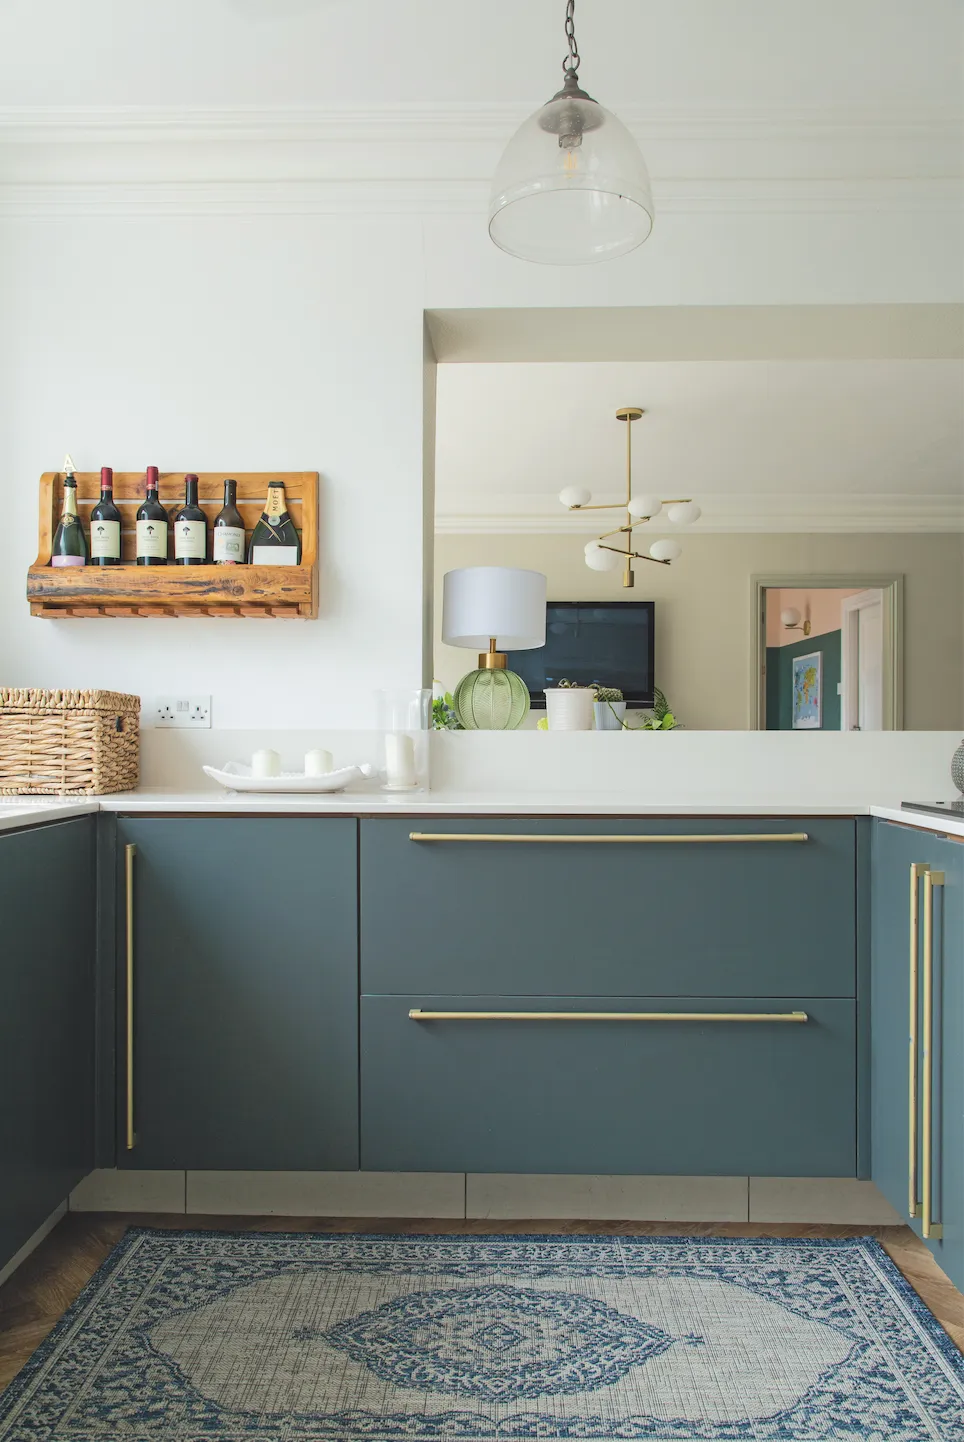 Spray paint kitchen handles in gold, like Jade, for a sleek new look on a budget